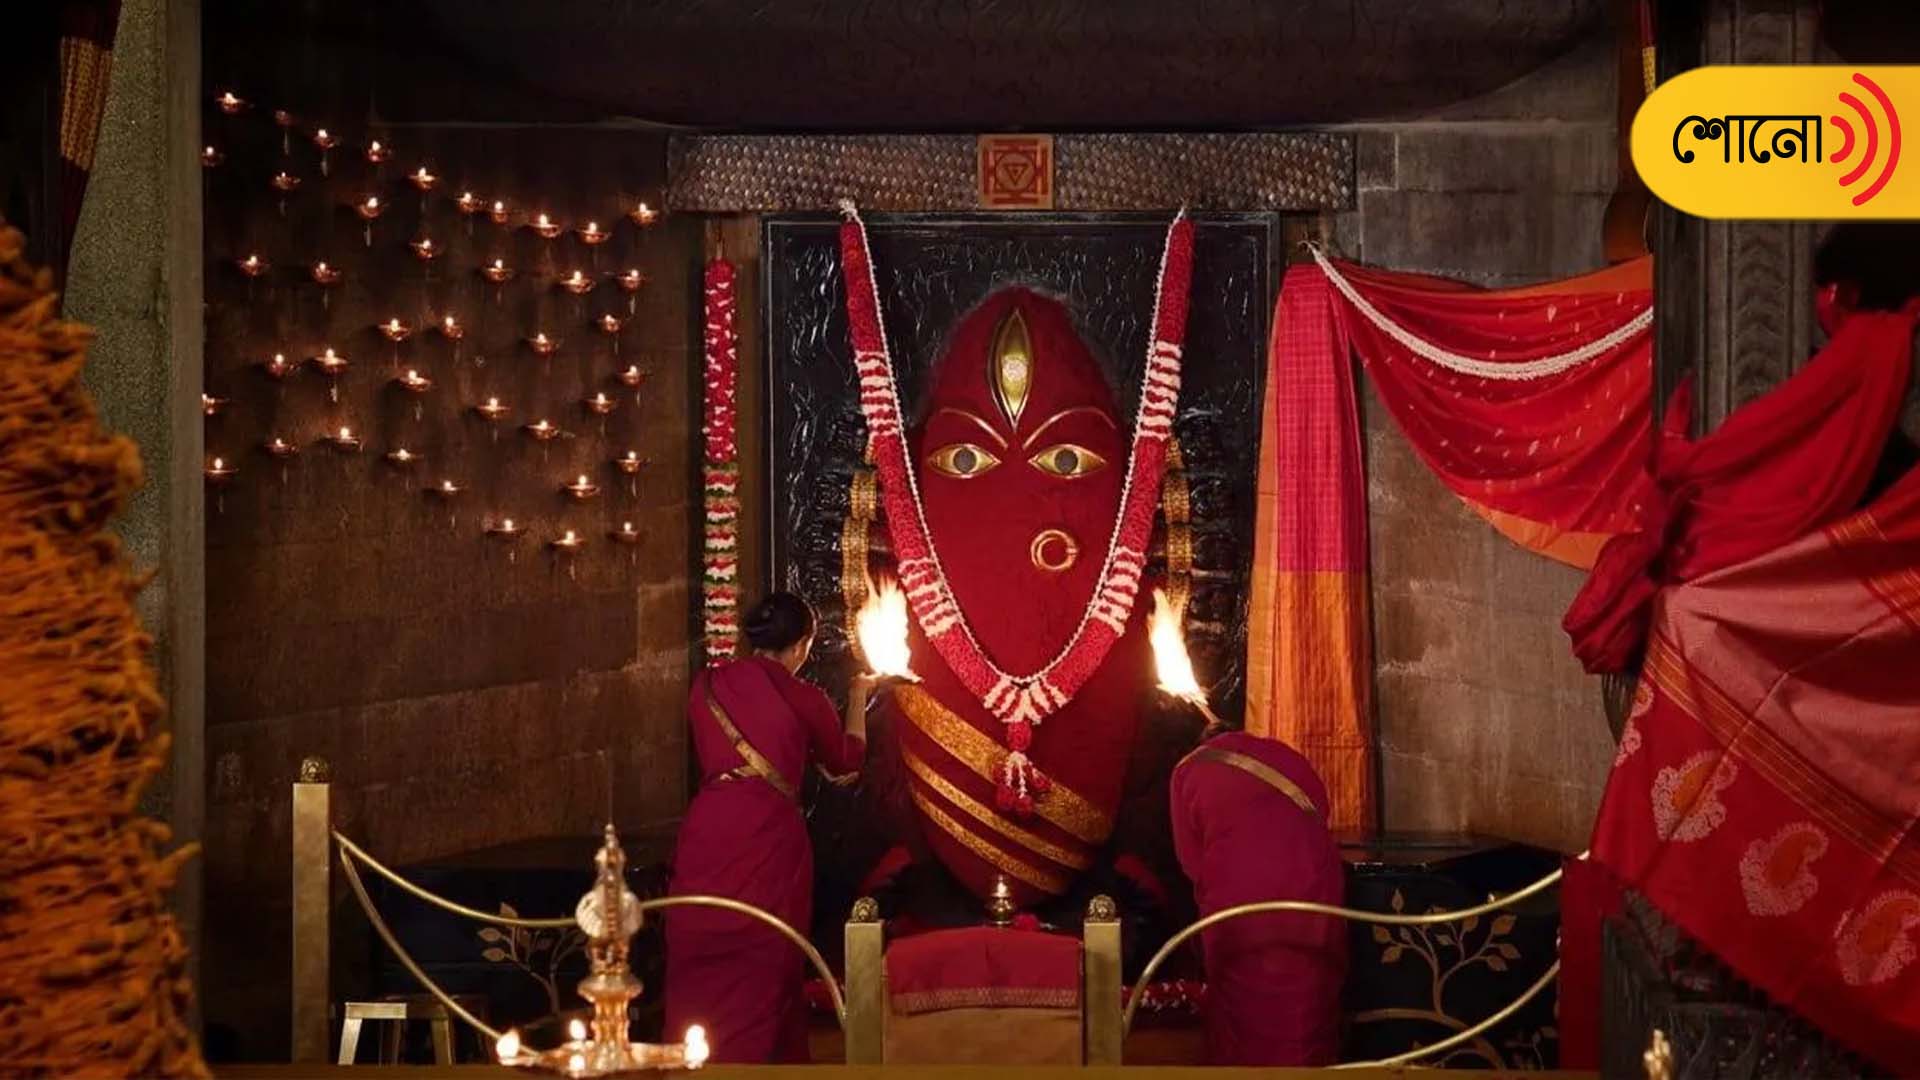 Only Female Priests, This Unique Temple In India Is Breaking Stereotypes